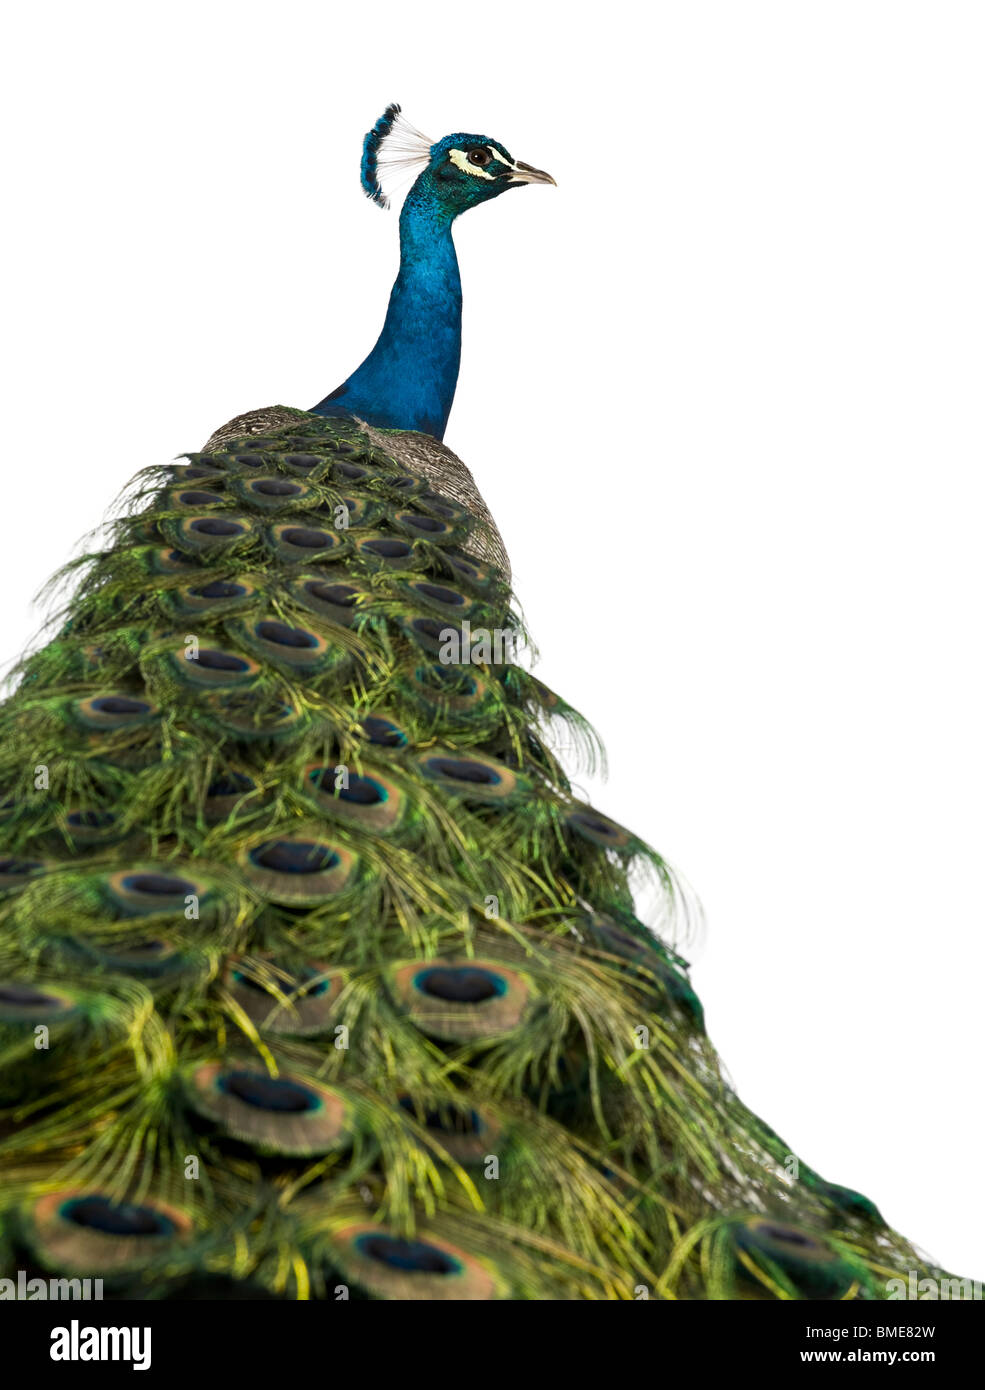 Rear view of a male Indian Peafowl in front of white background Stock Photo